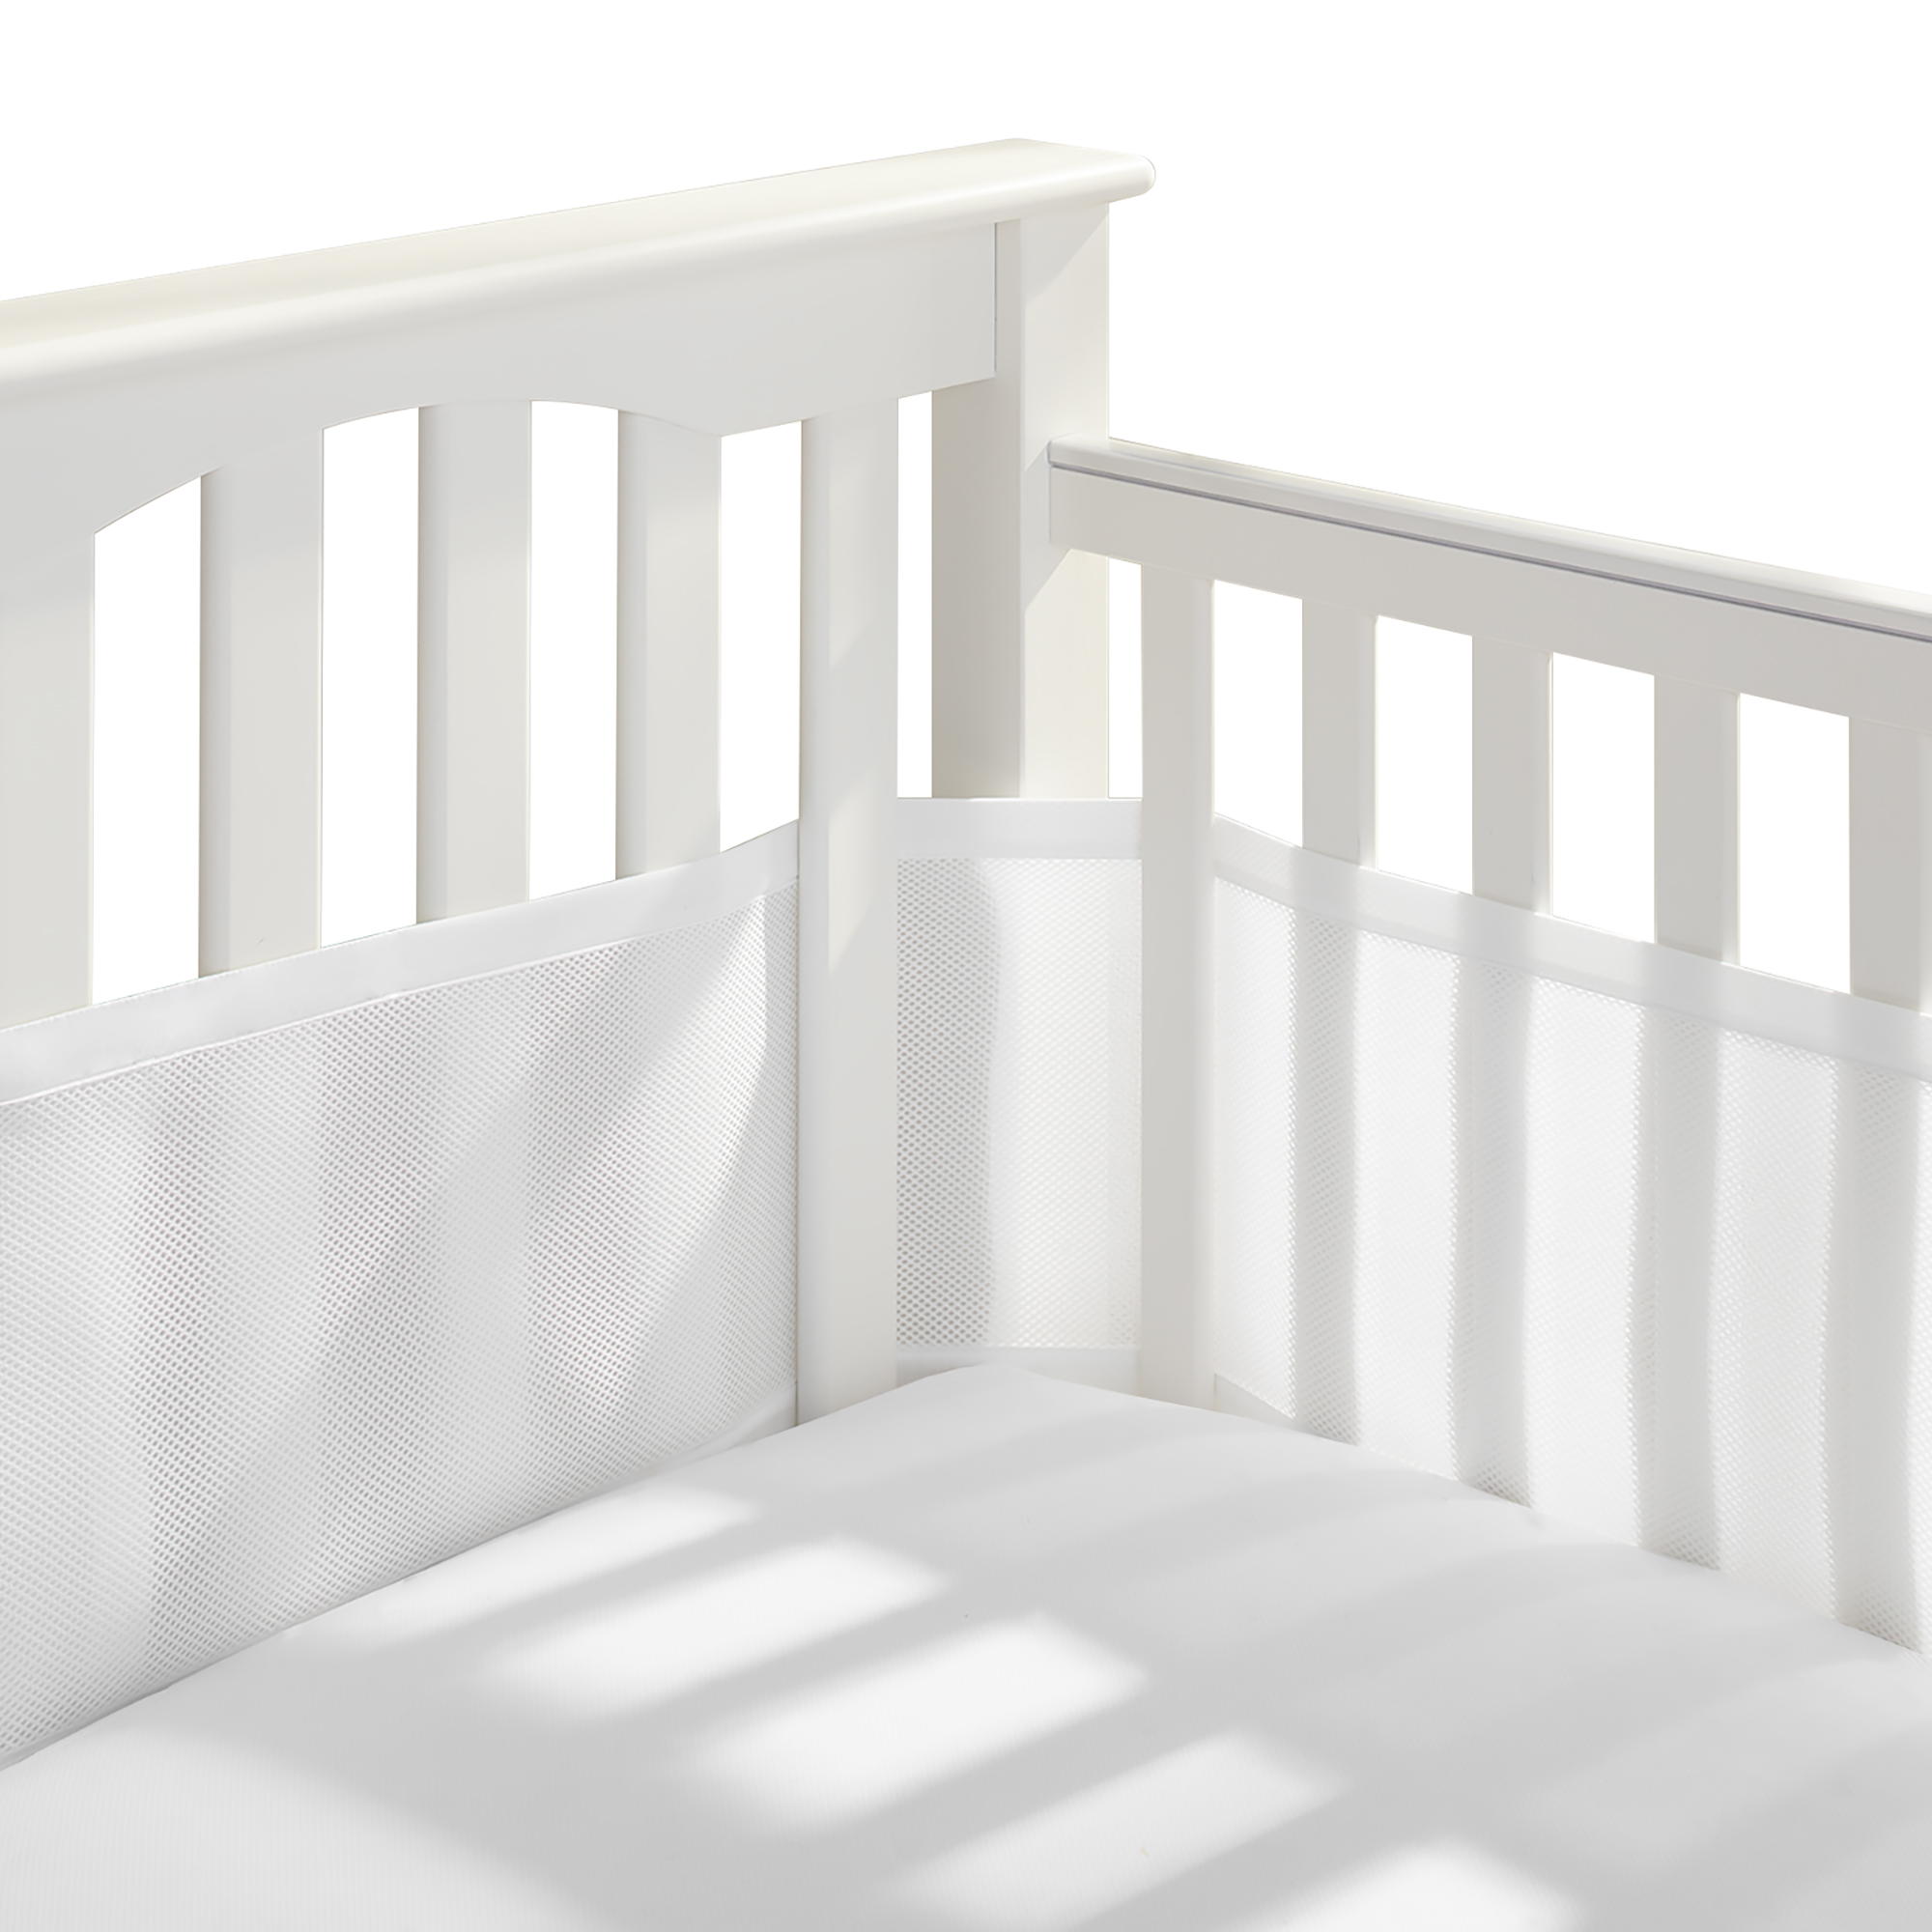 BreathableBaby Breathable Mesh Liner For Full-Size Cribs, Classic 3mm Mesh, White - image 1 of 6